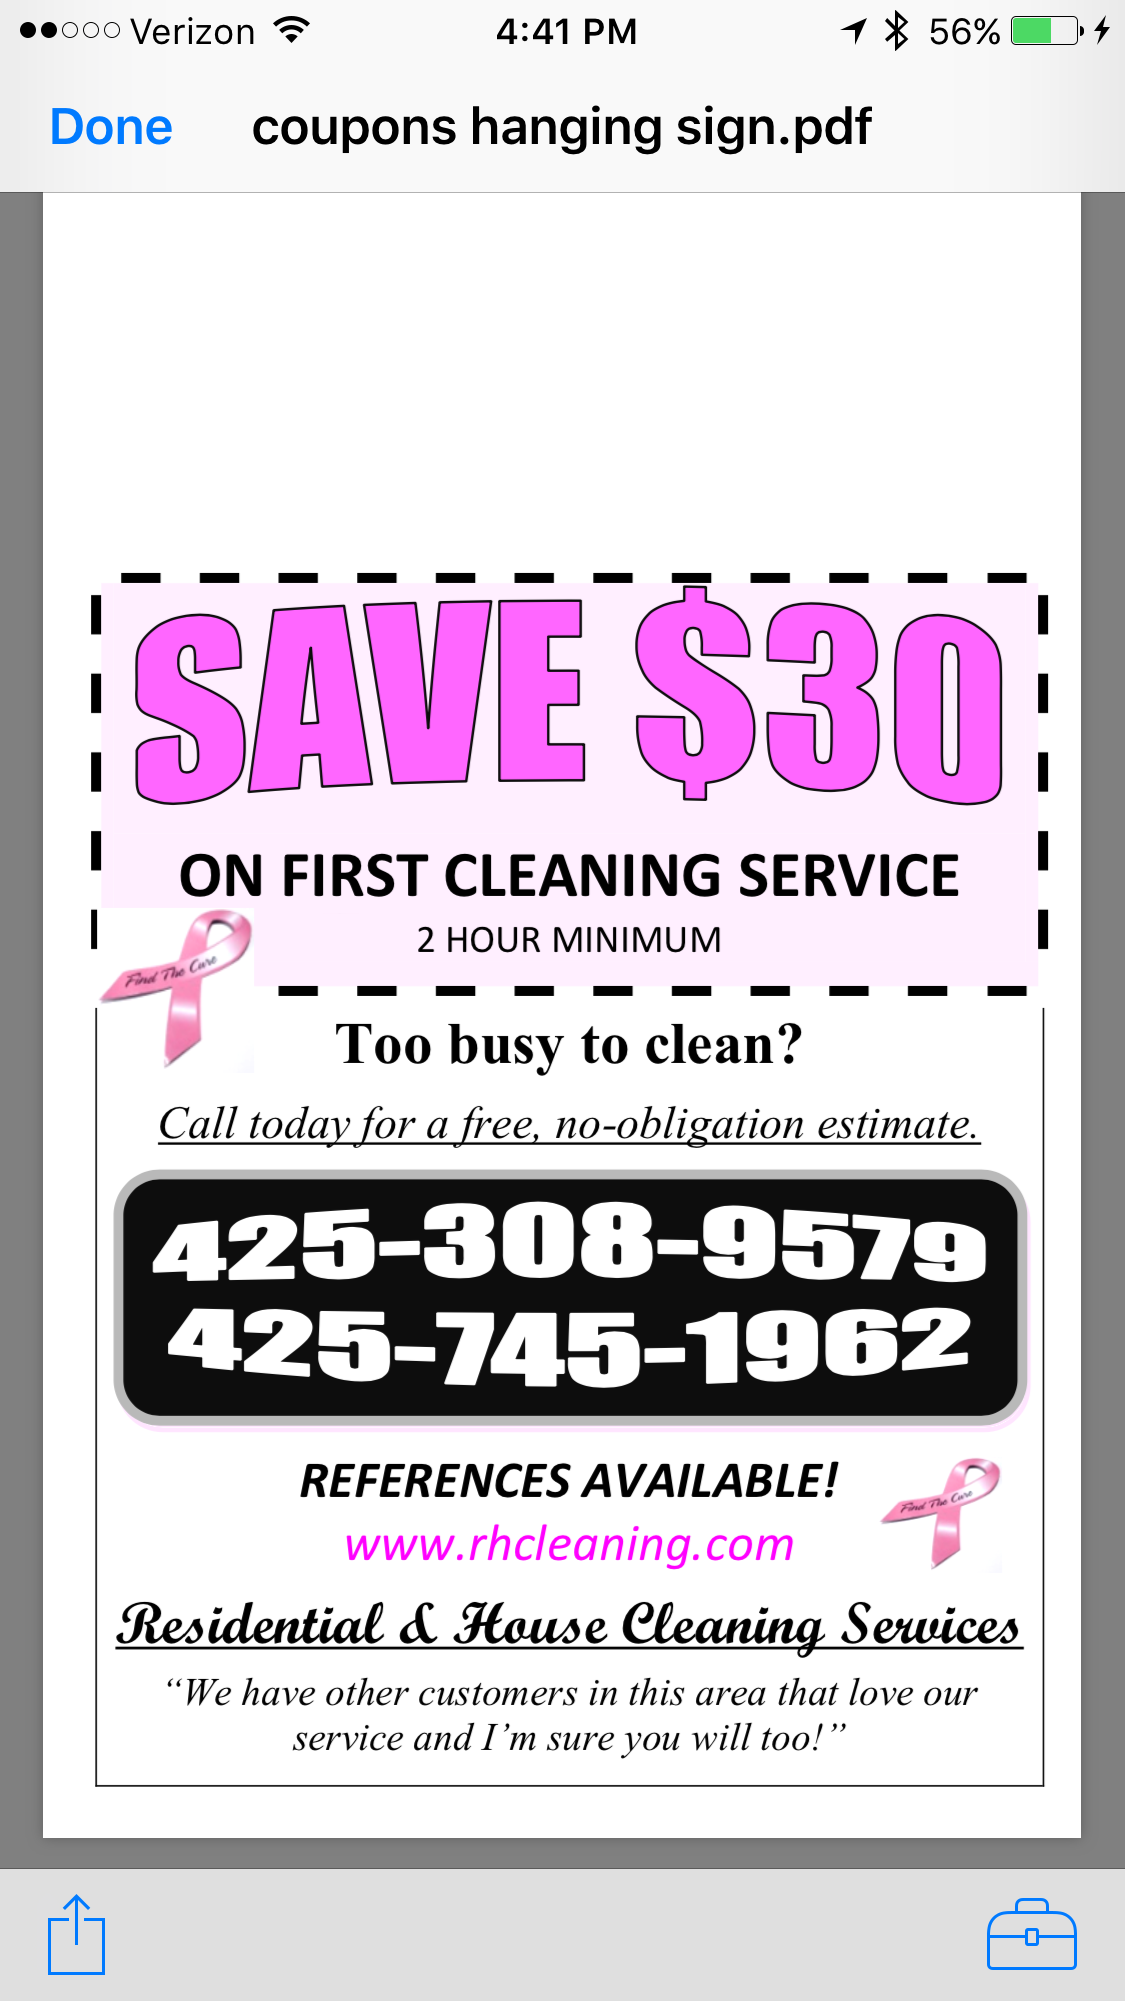 Adolfo & Lorena's Residential & House Cleaning Services Logo